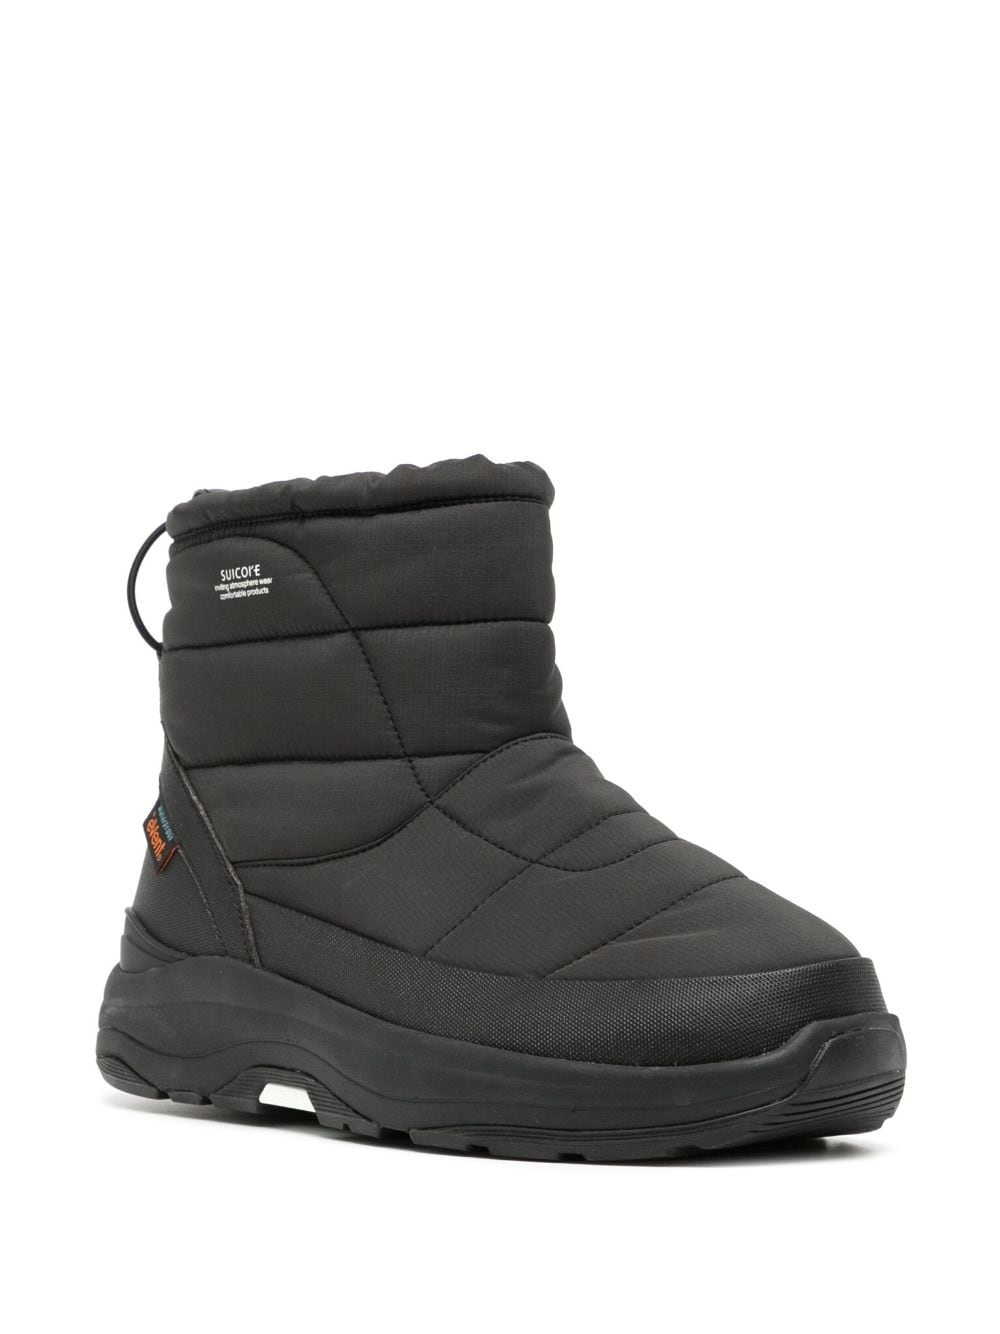 Bower padded snow boots - 2